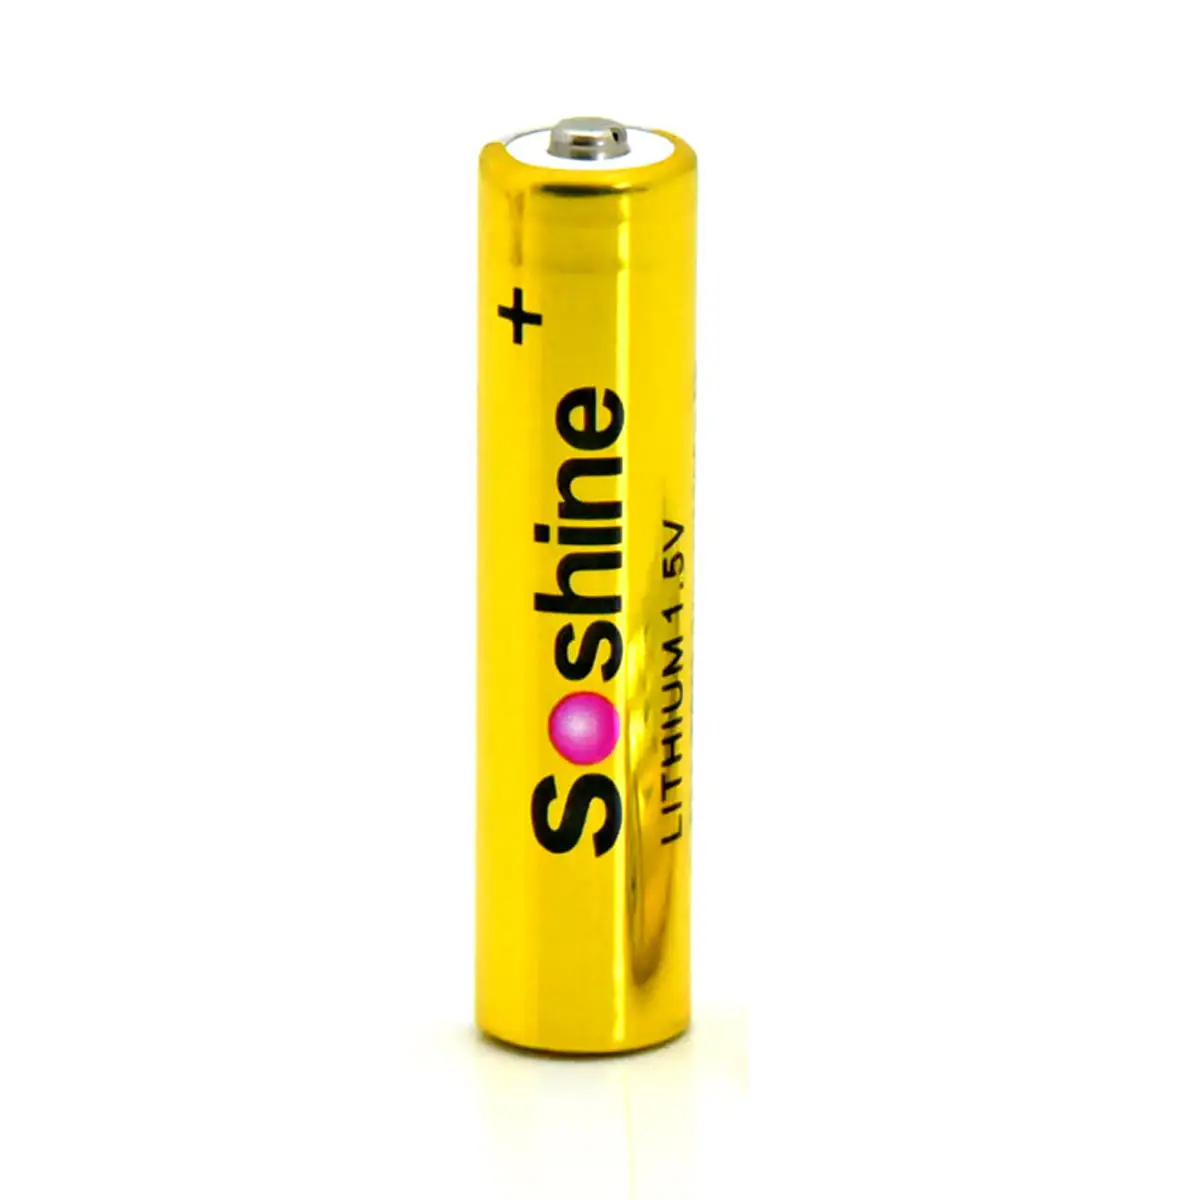 Primary lithium AAA 1.5V battery: 1200mAh (Ave.)